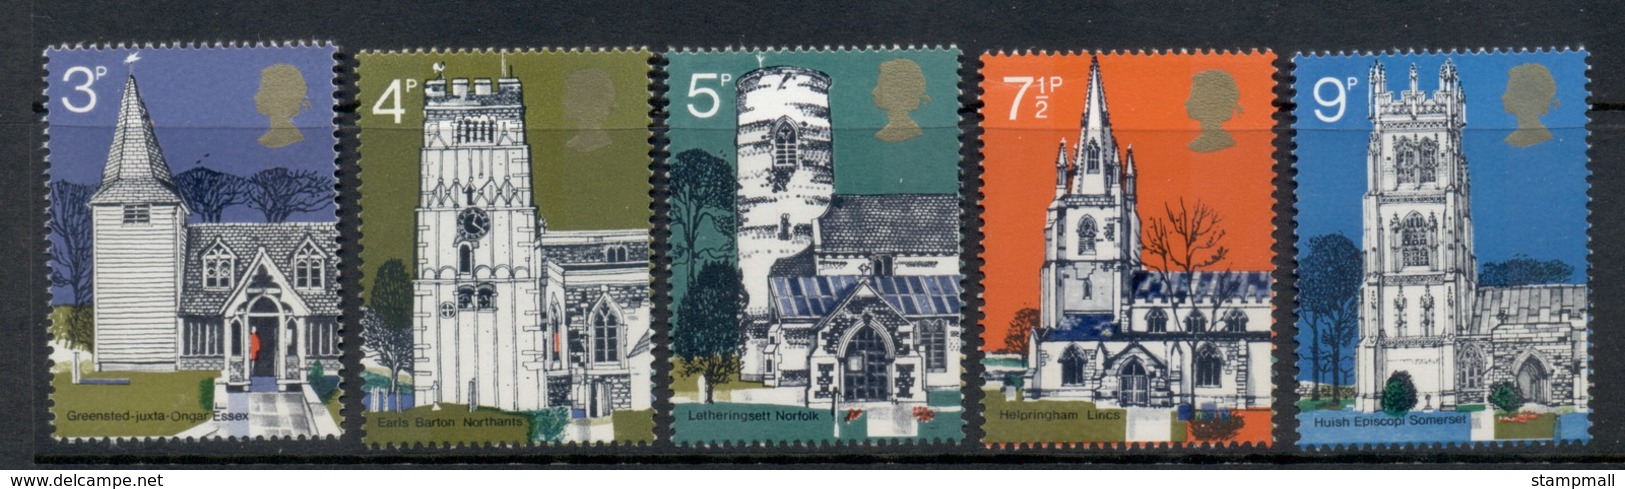 GB 1972 Old Village Churches MUH - Unclassified